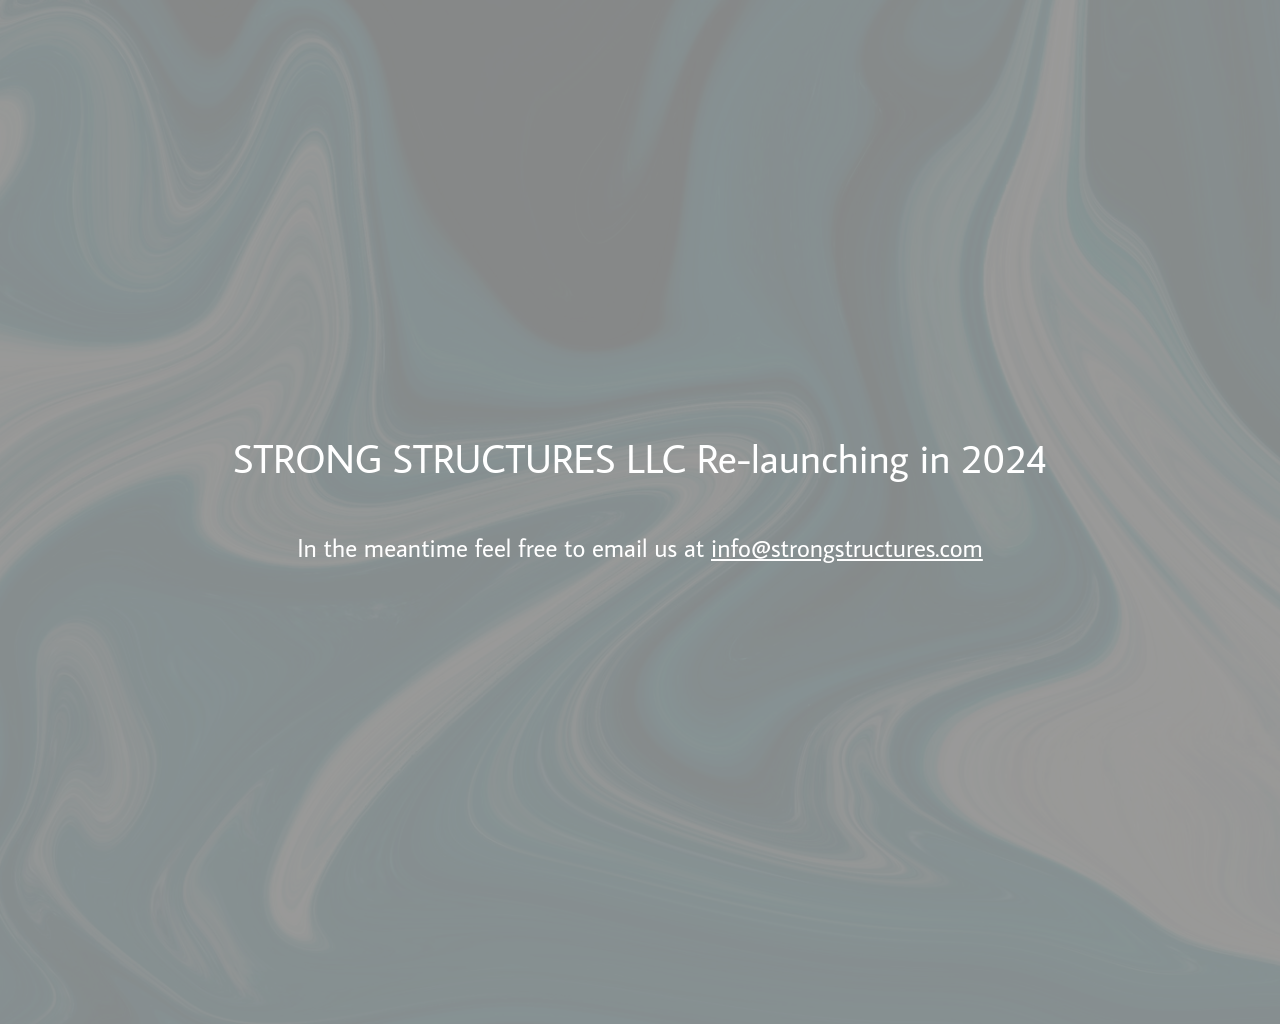 strongstructures.com